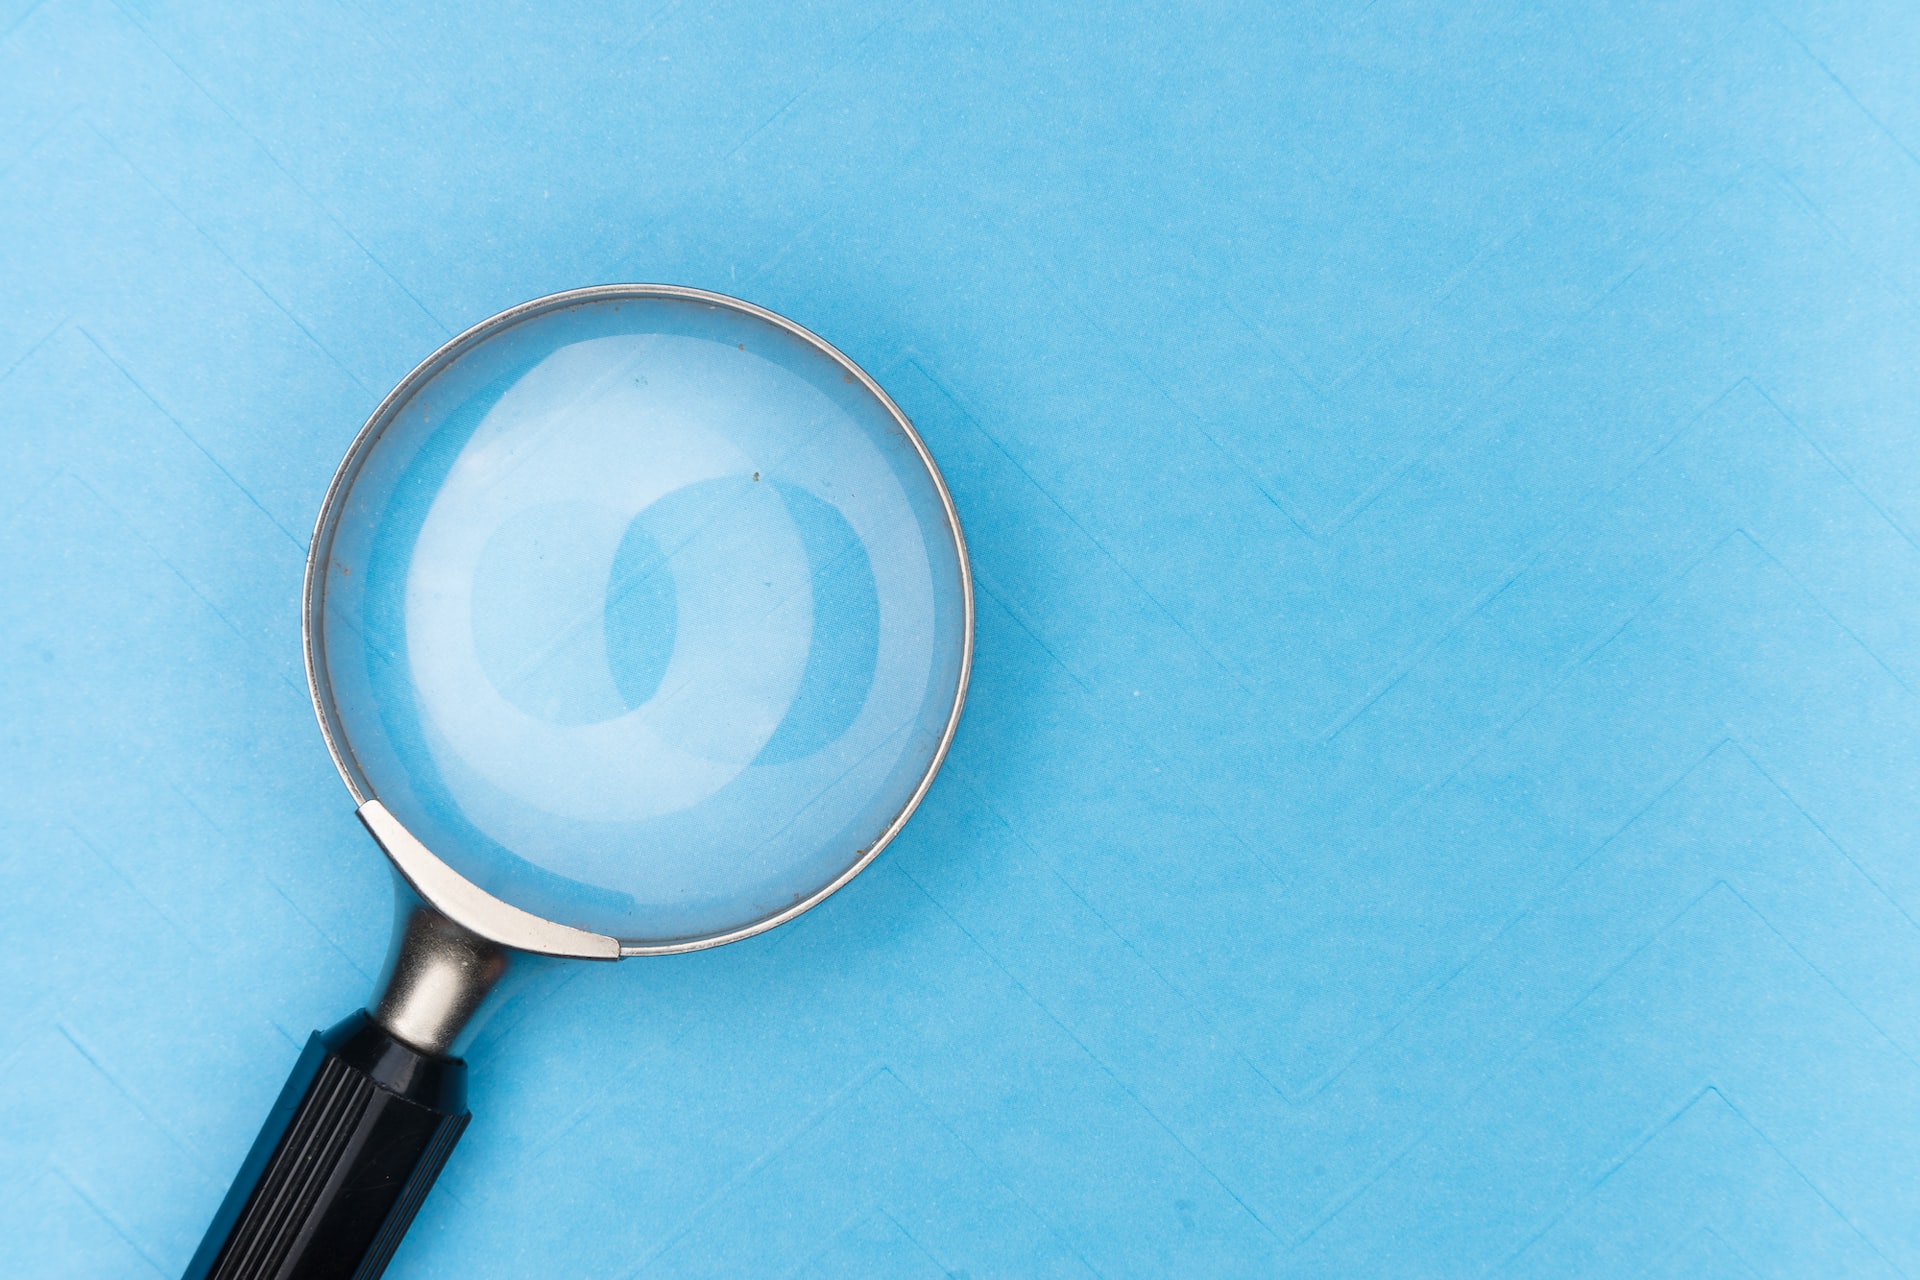 A magnifying glass on light blue background